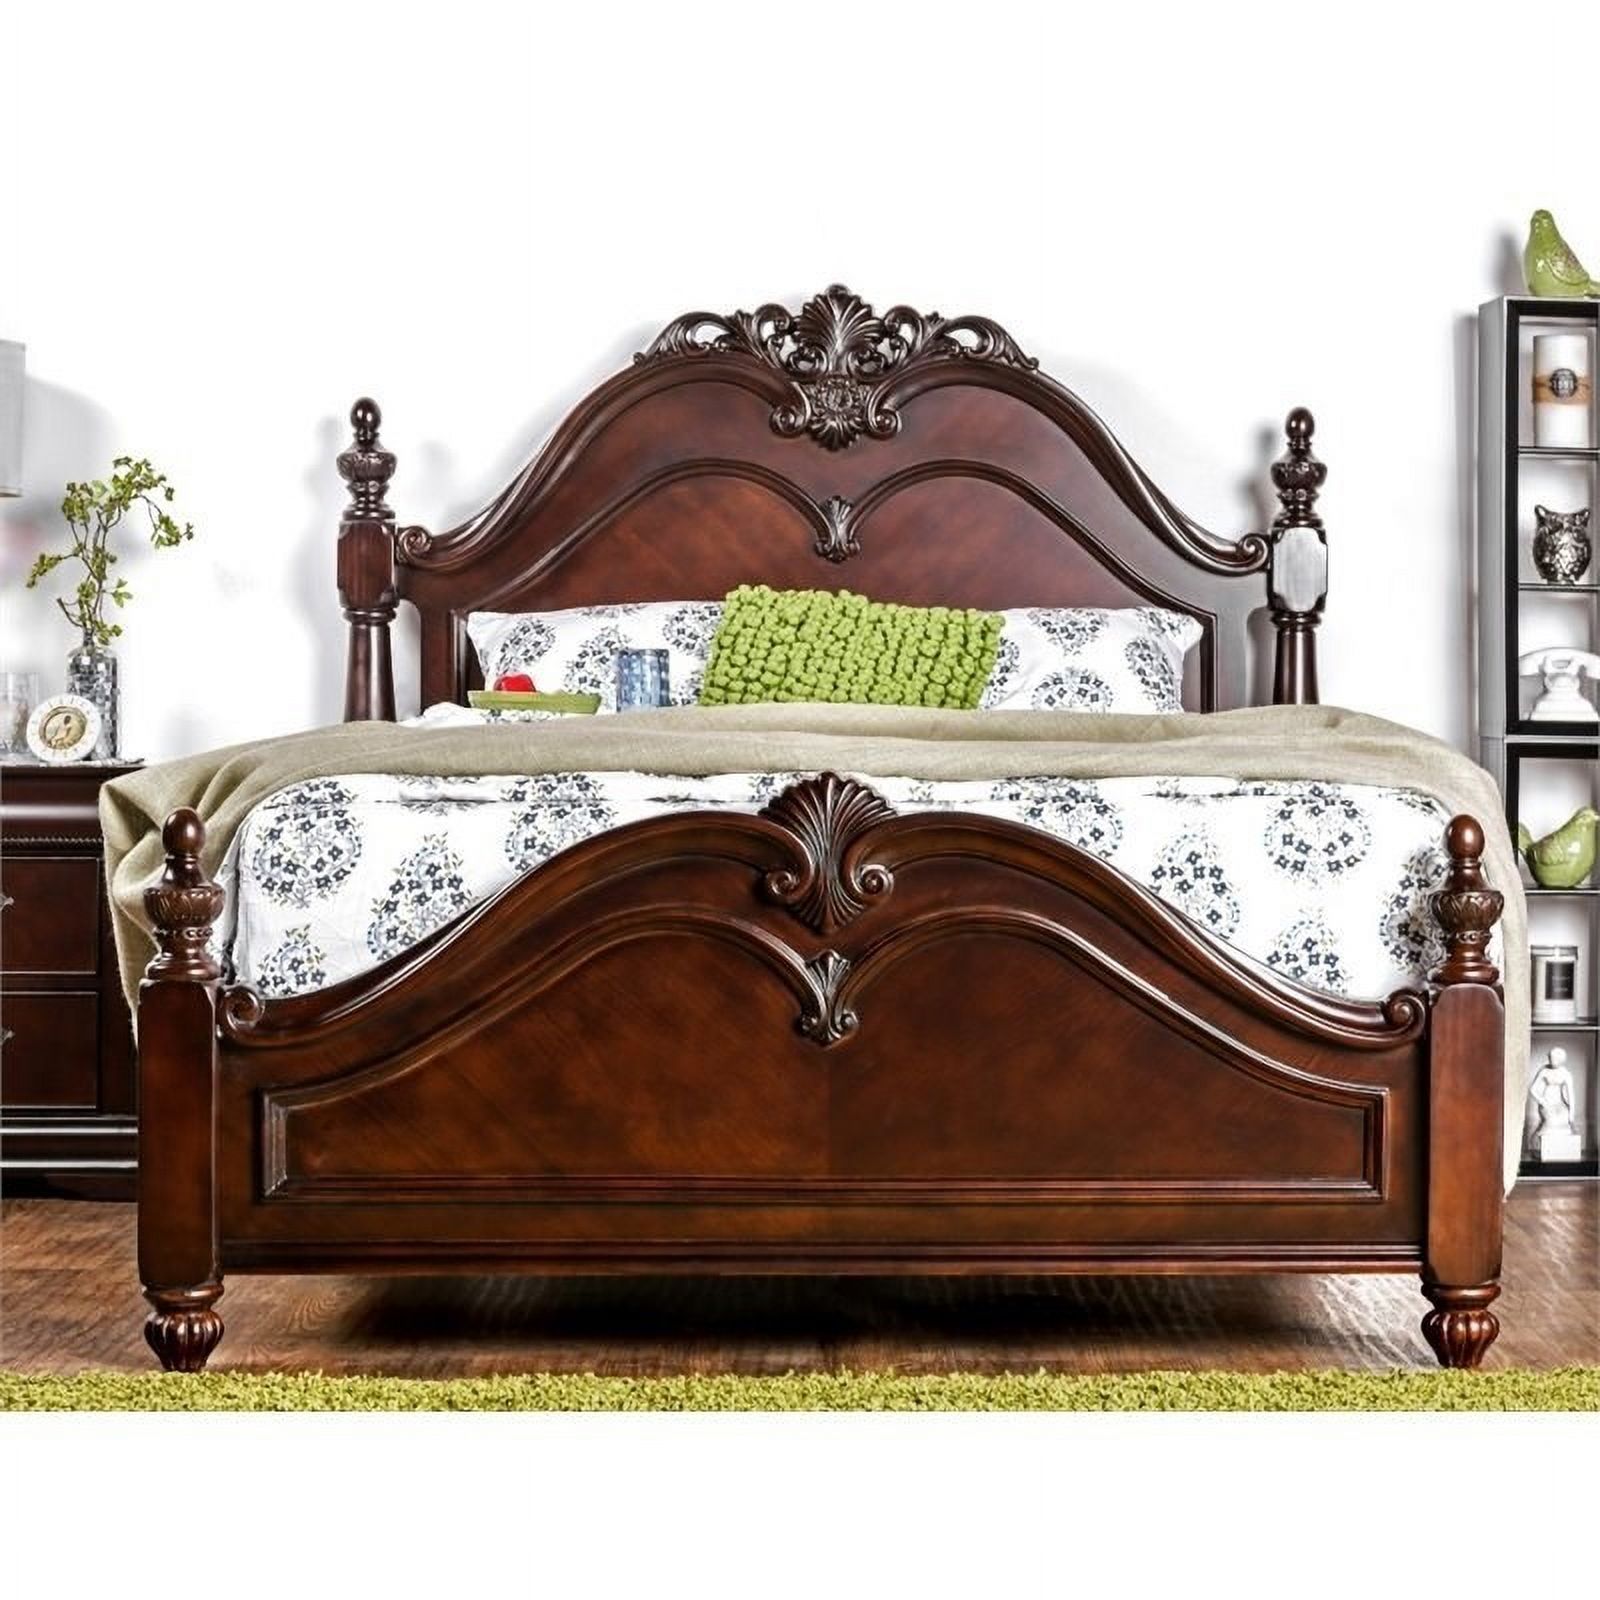 Ruben 2-Piece Cherry Wood Queen Poster Bed and 5-Drawer Chest Set - image 2 of 13